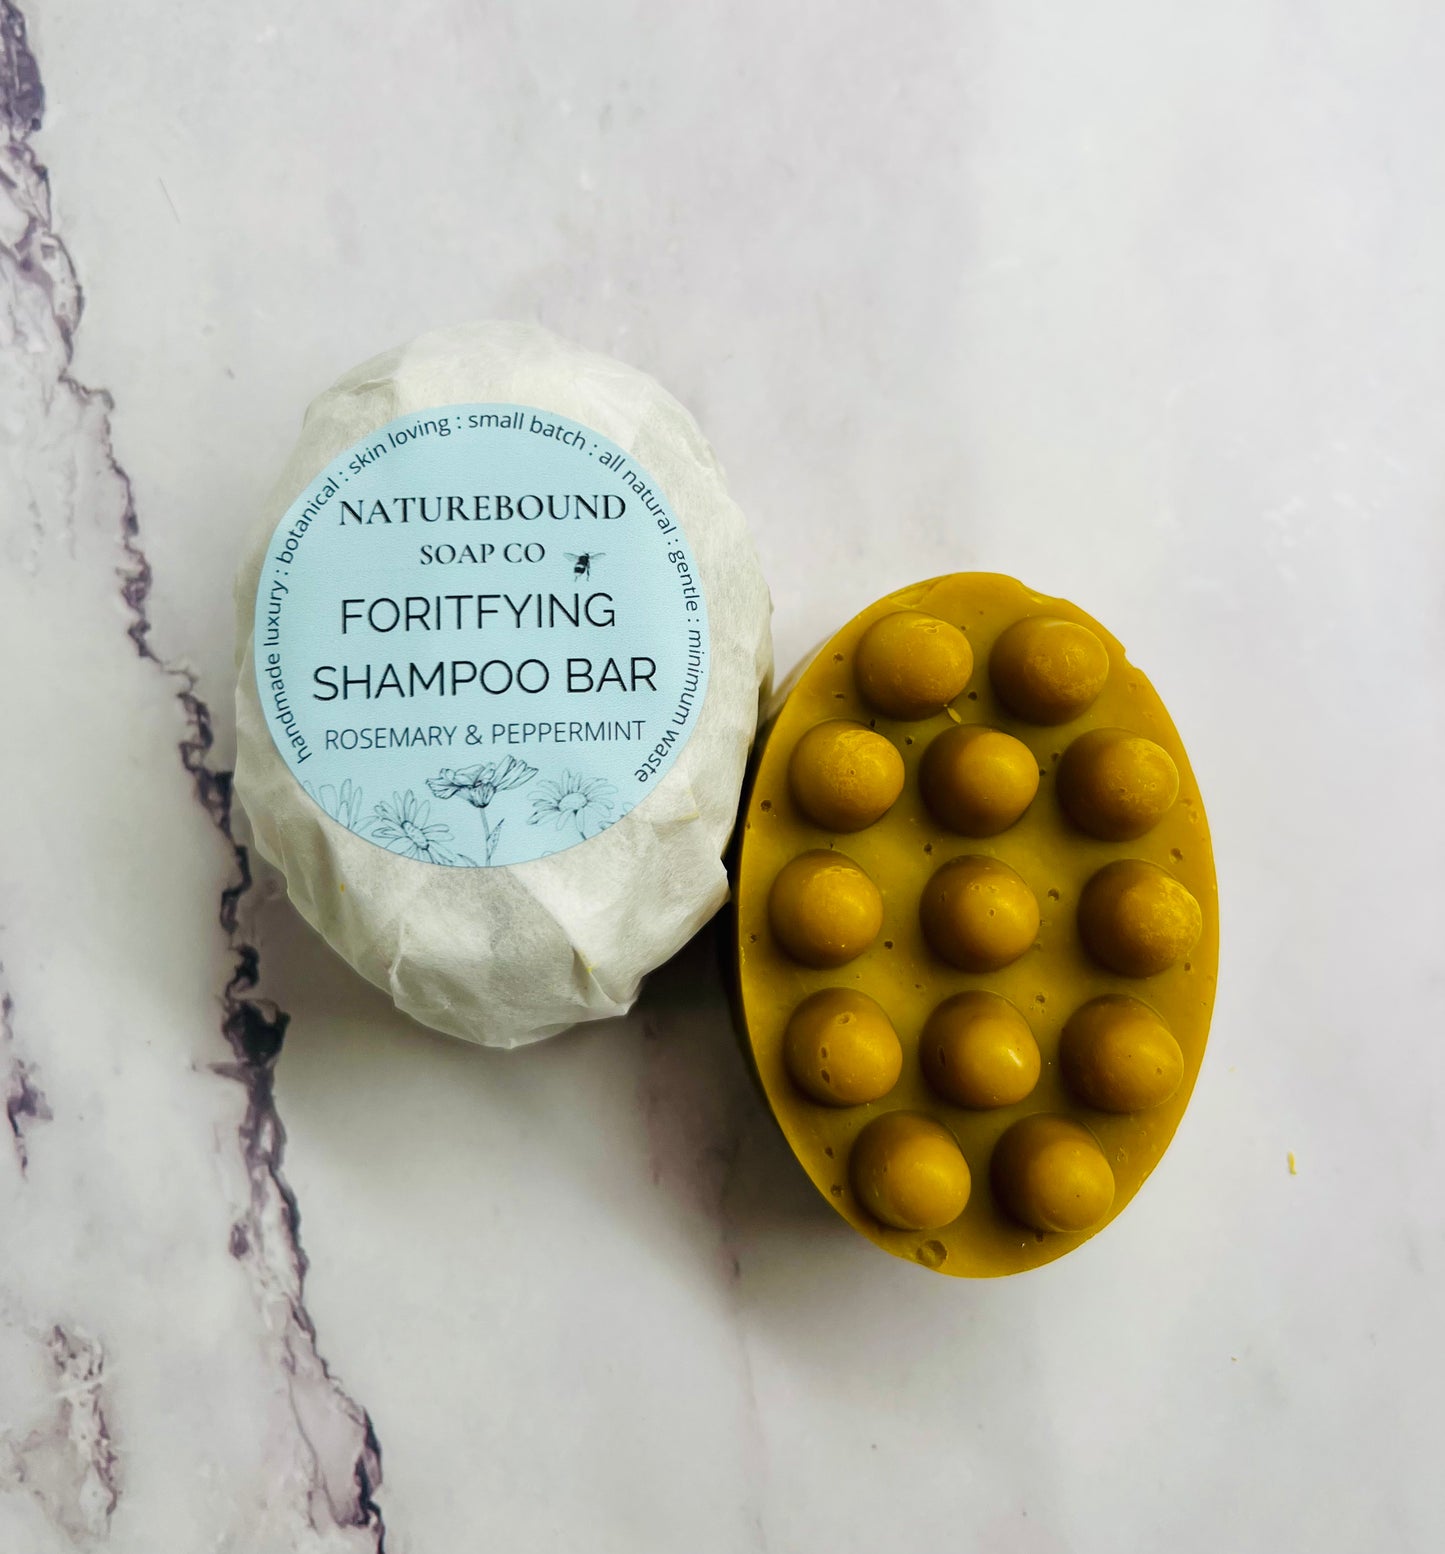 FORTIFYING SHAMPOO BAR- Rosemary & Peppermint